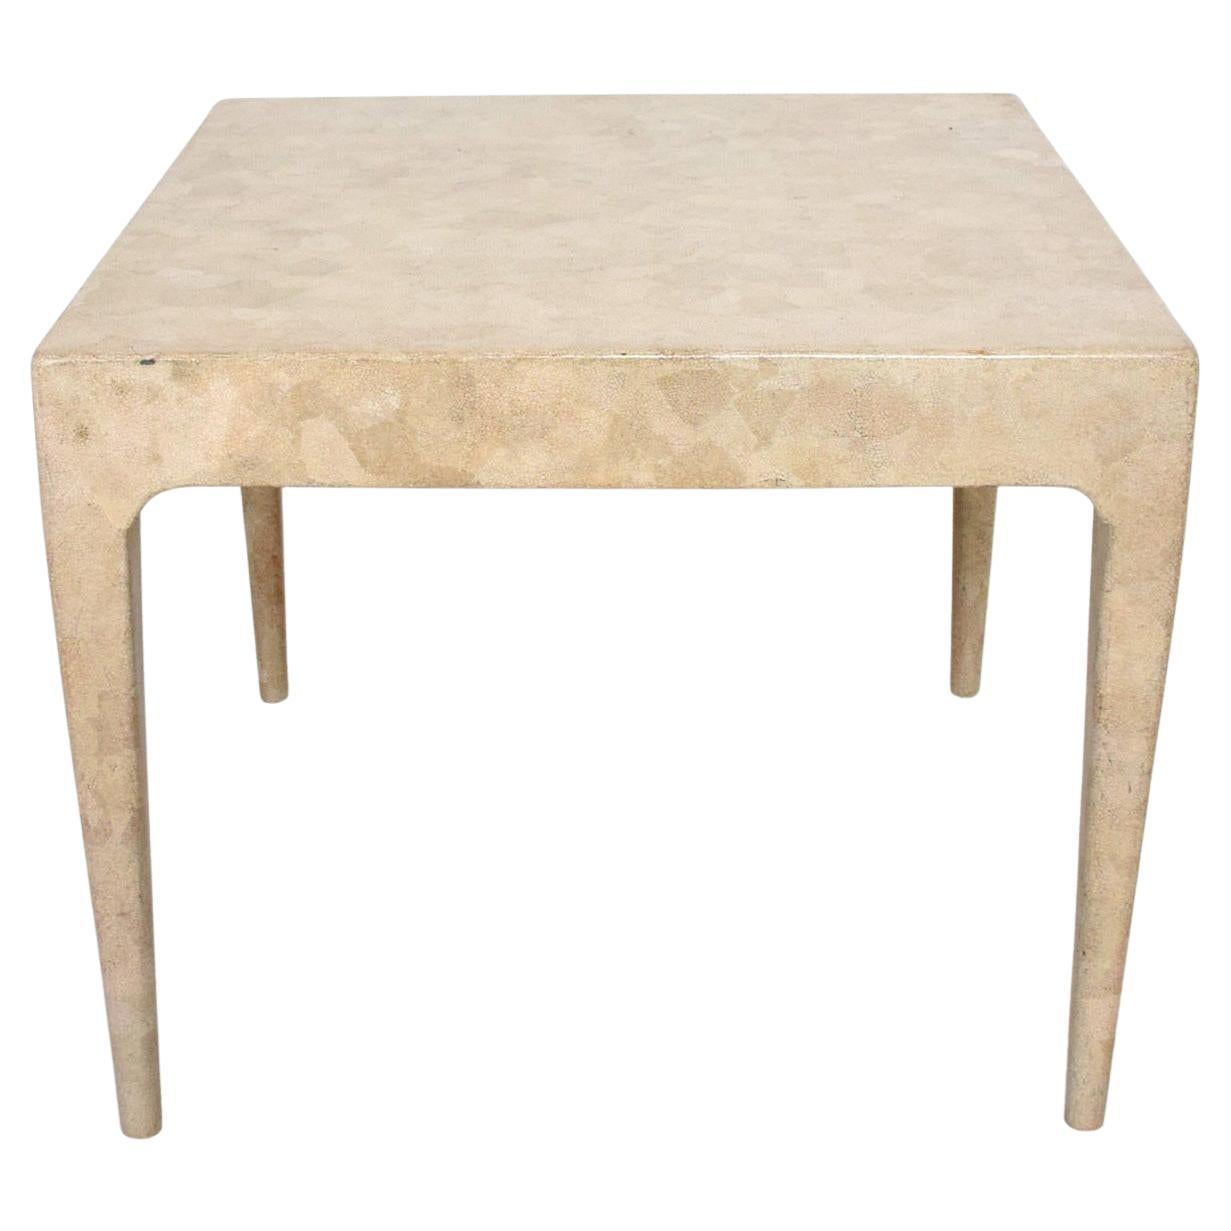 1970s Style Aldo Tura Exquisite Side Table Tessellated Stone 